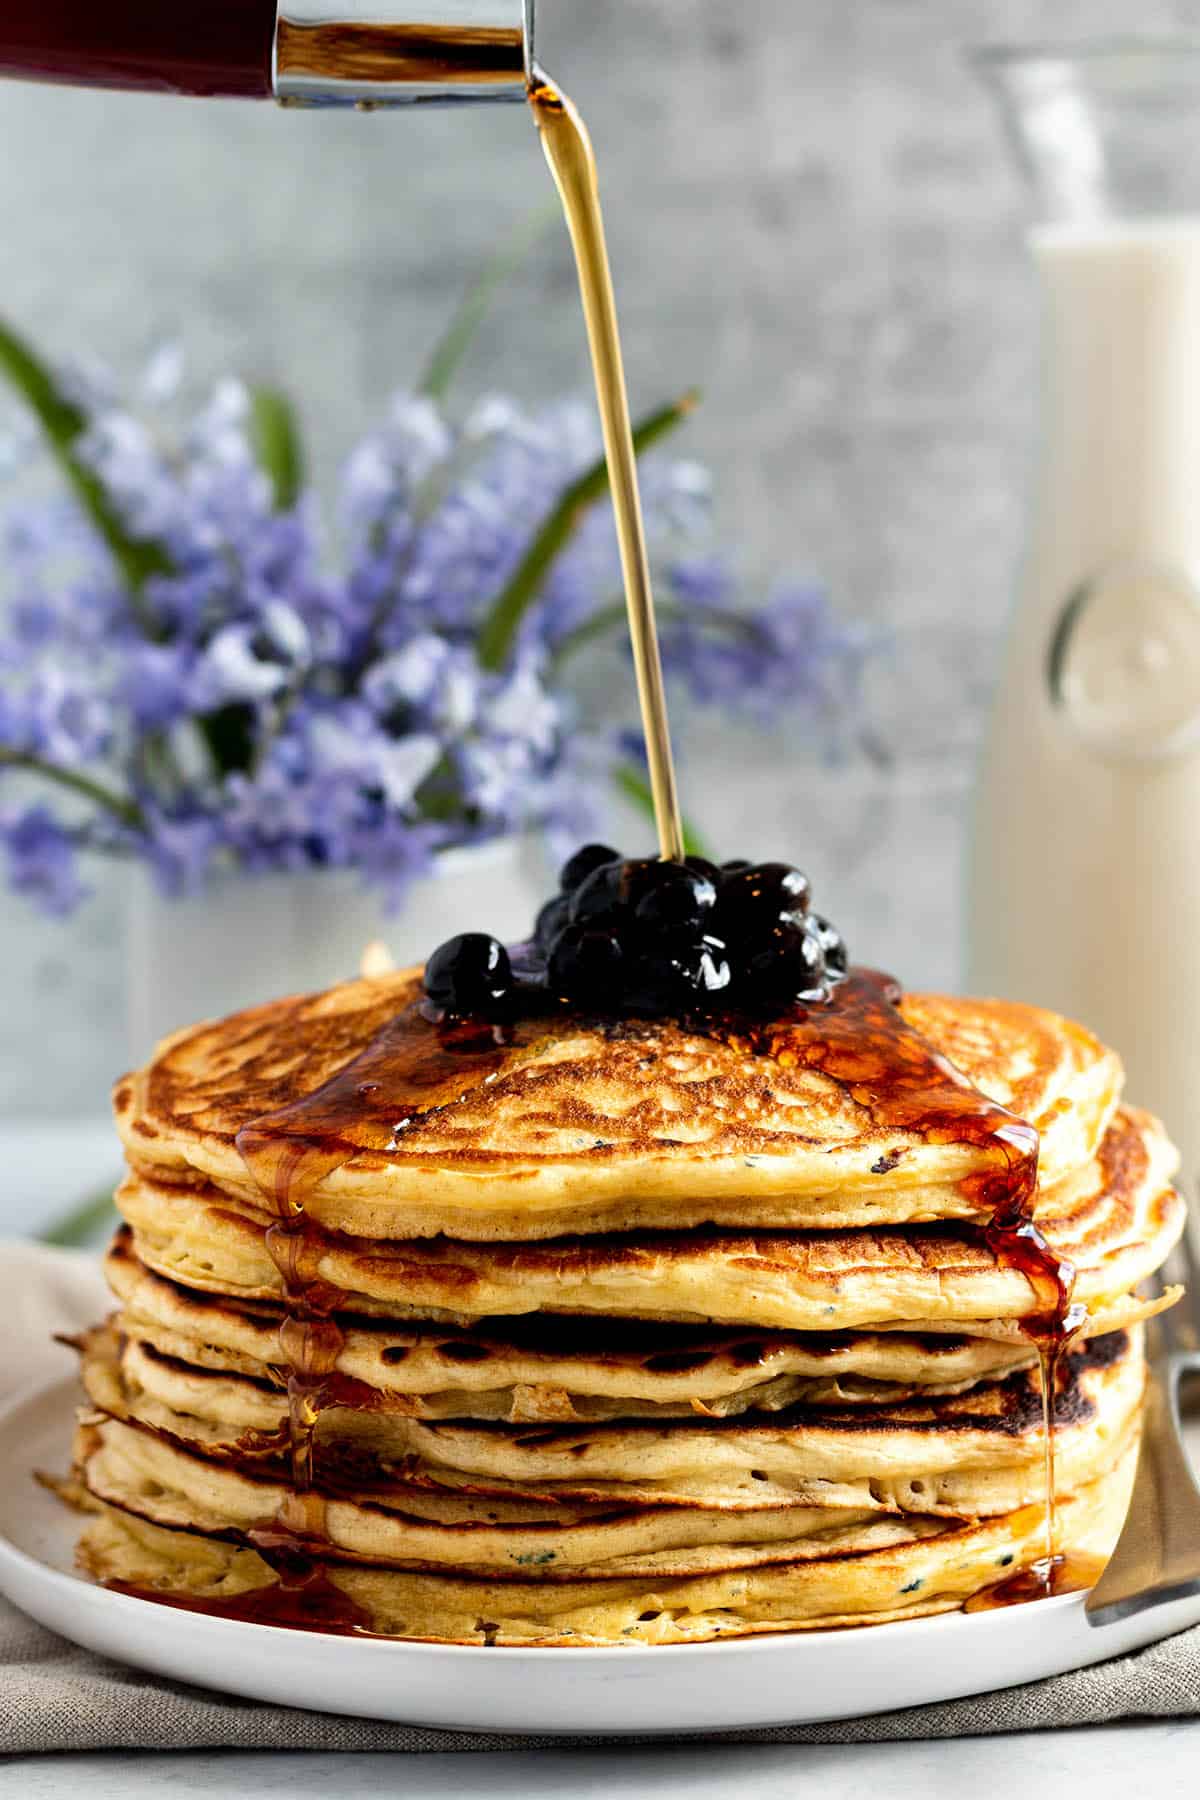 A tall stack of sourdough pancakes with blueberries on top and syrup being drizzled.